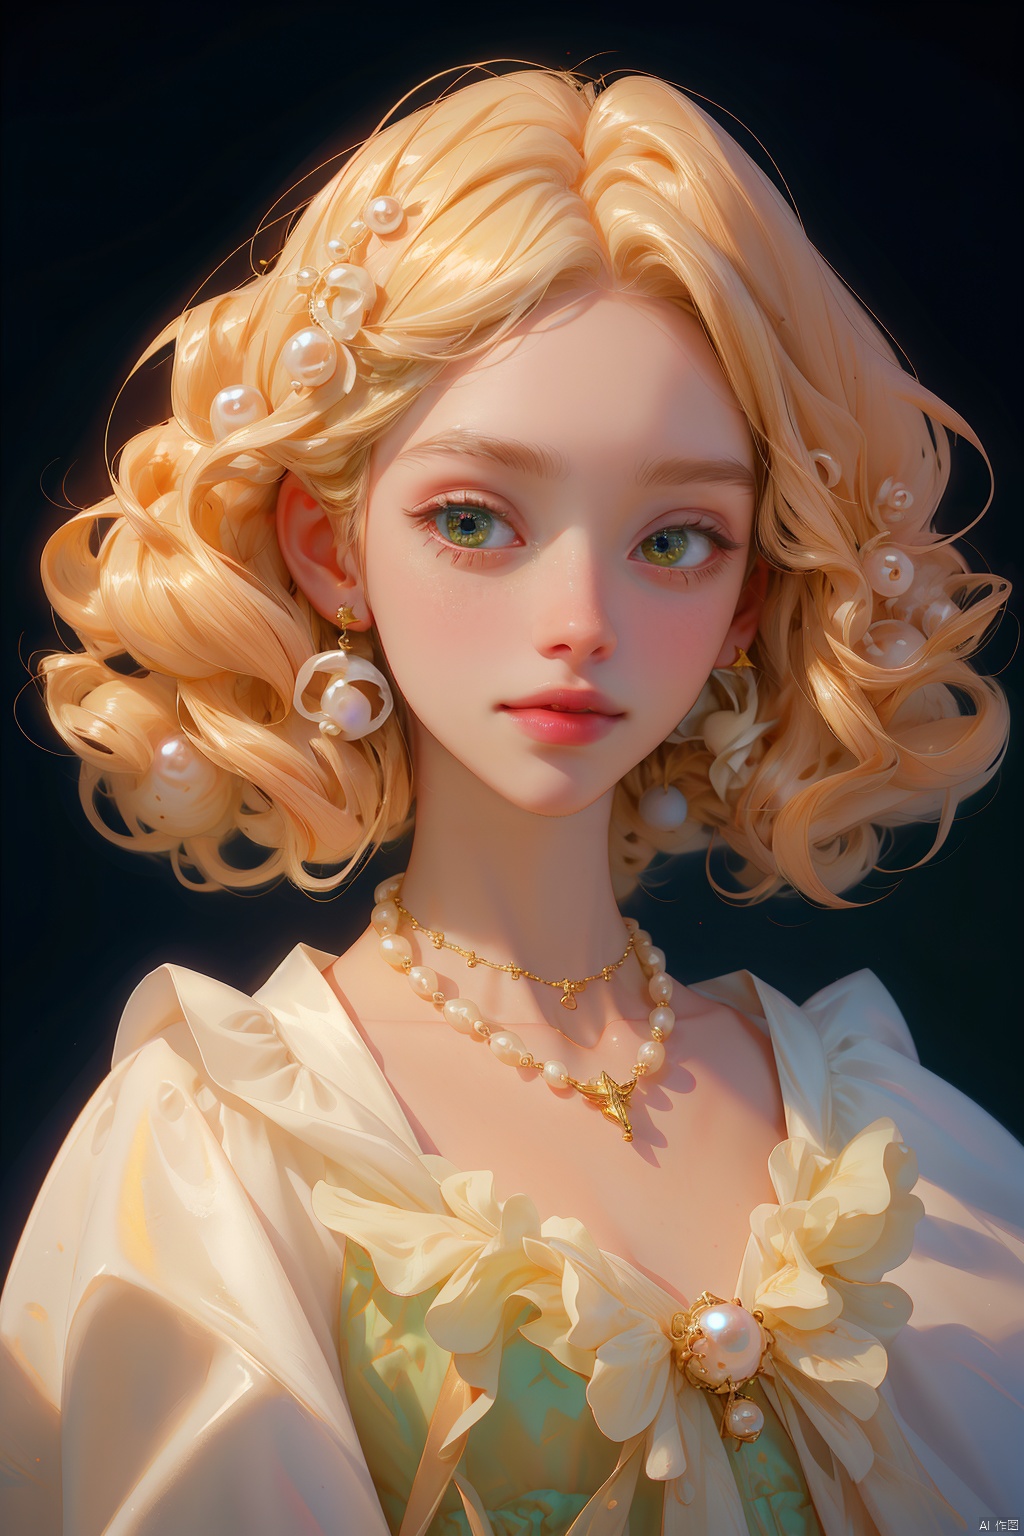  quality, 8K, extremely complex details, 1girl, lolita, Light hair,looking_at_viewer,  full_shot, necklace, pearls andjewels, angel